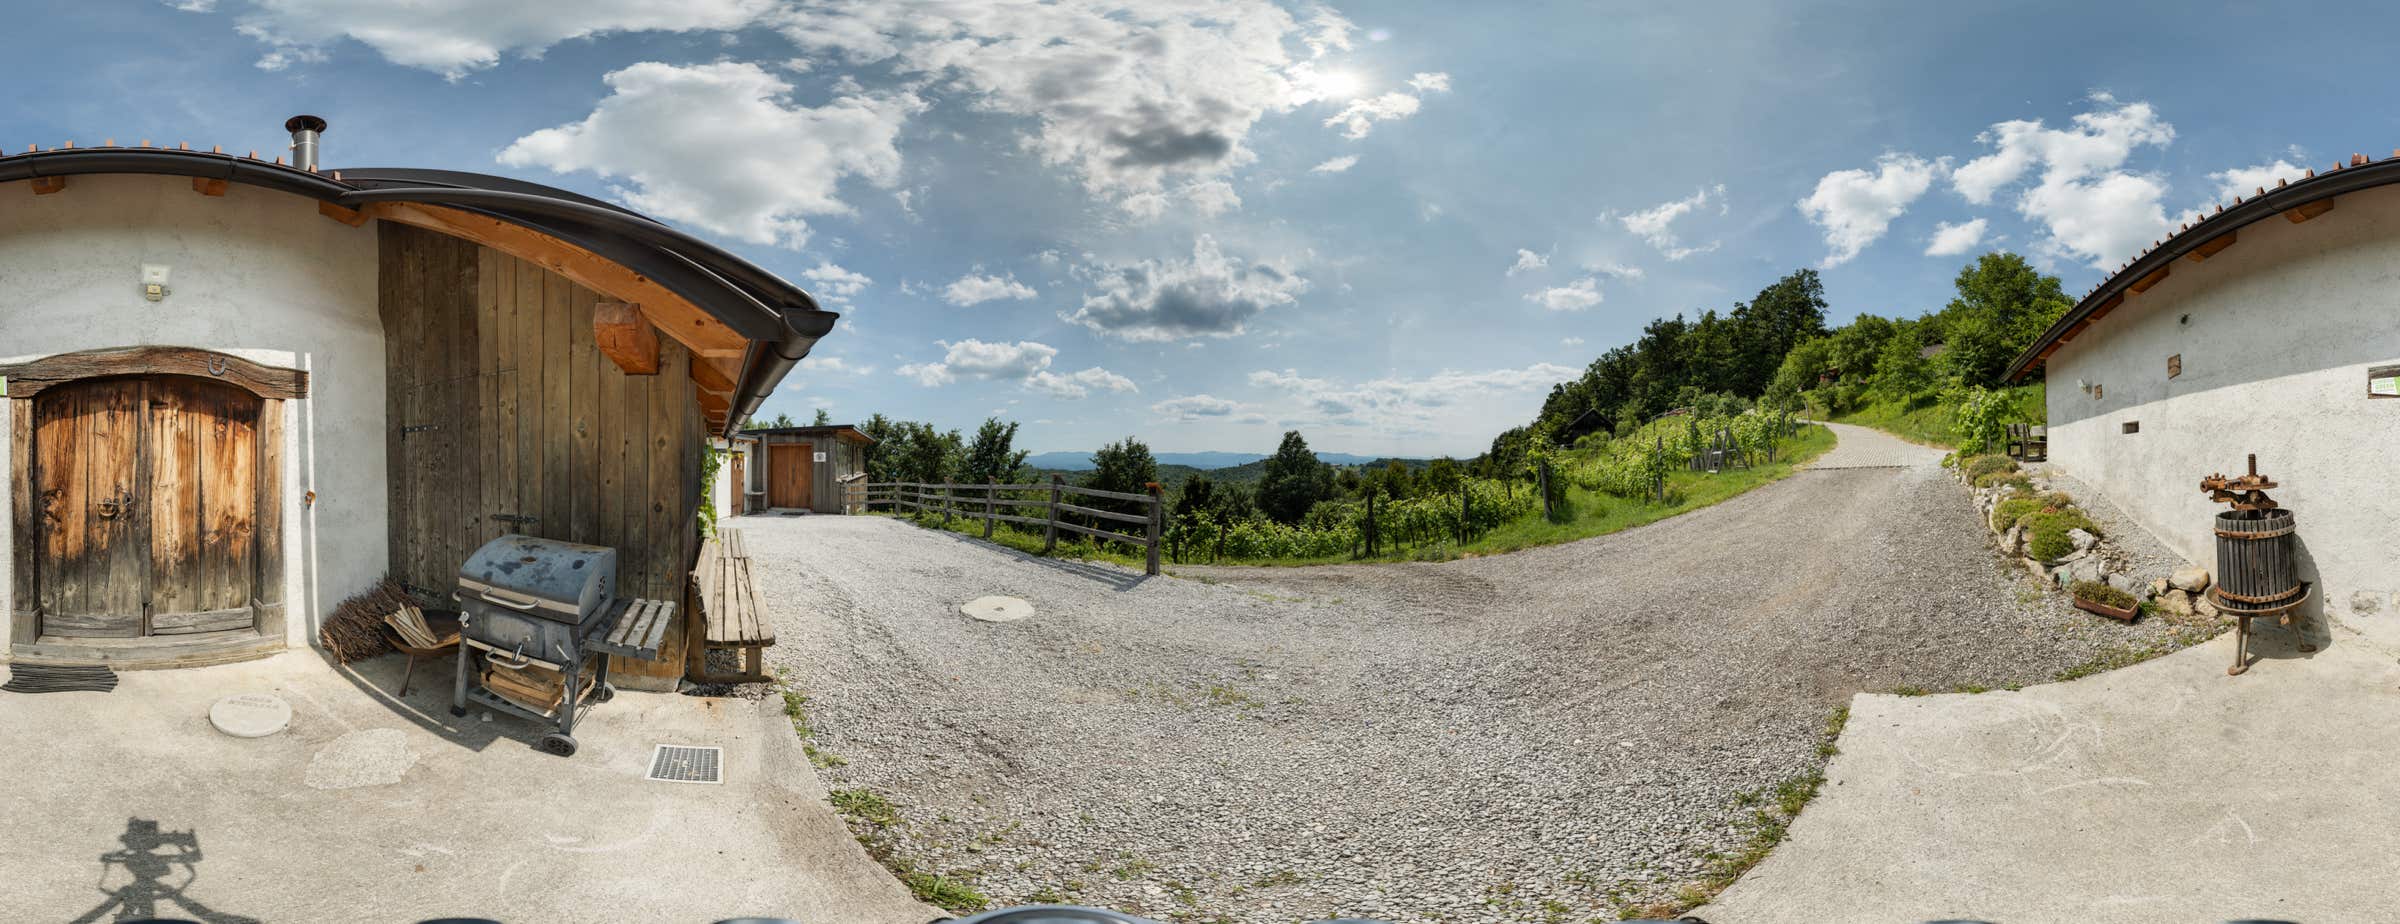 Panoramic image outside of a Škatlar showing its entrance area and the view over the vineyard right next to the building. 